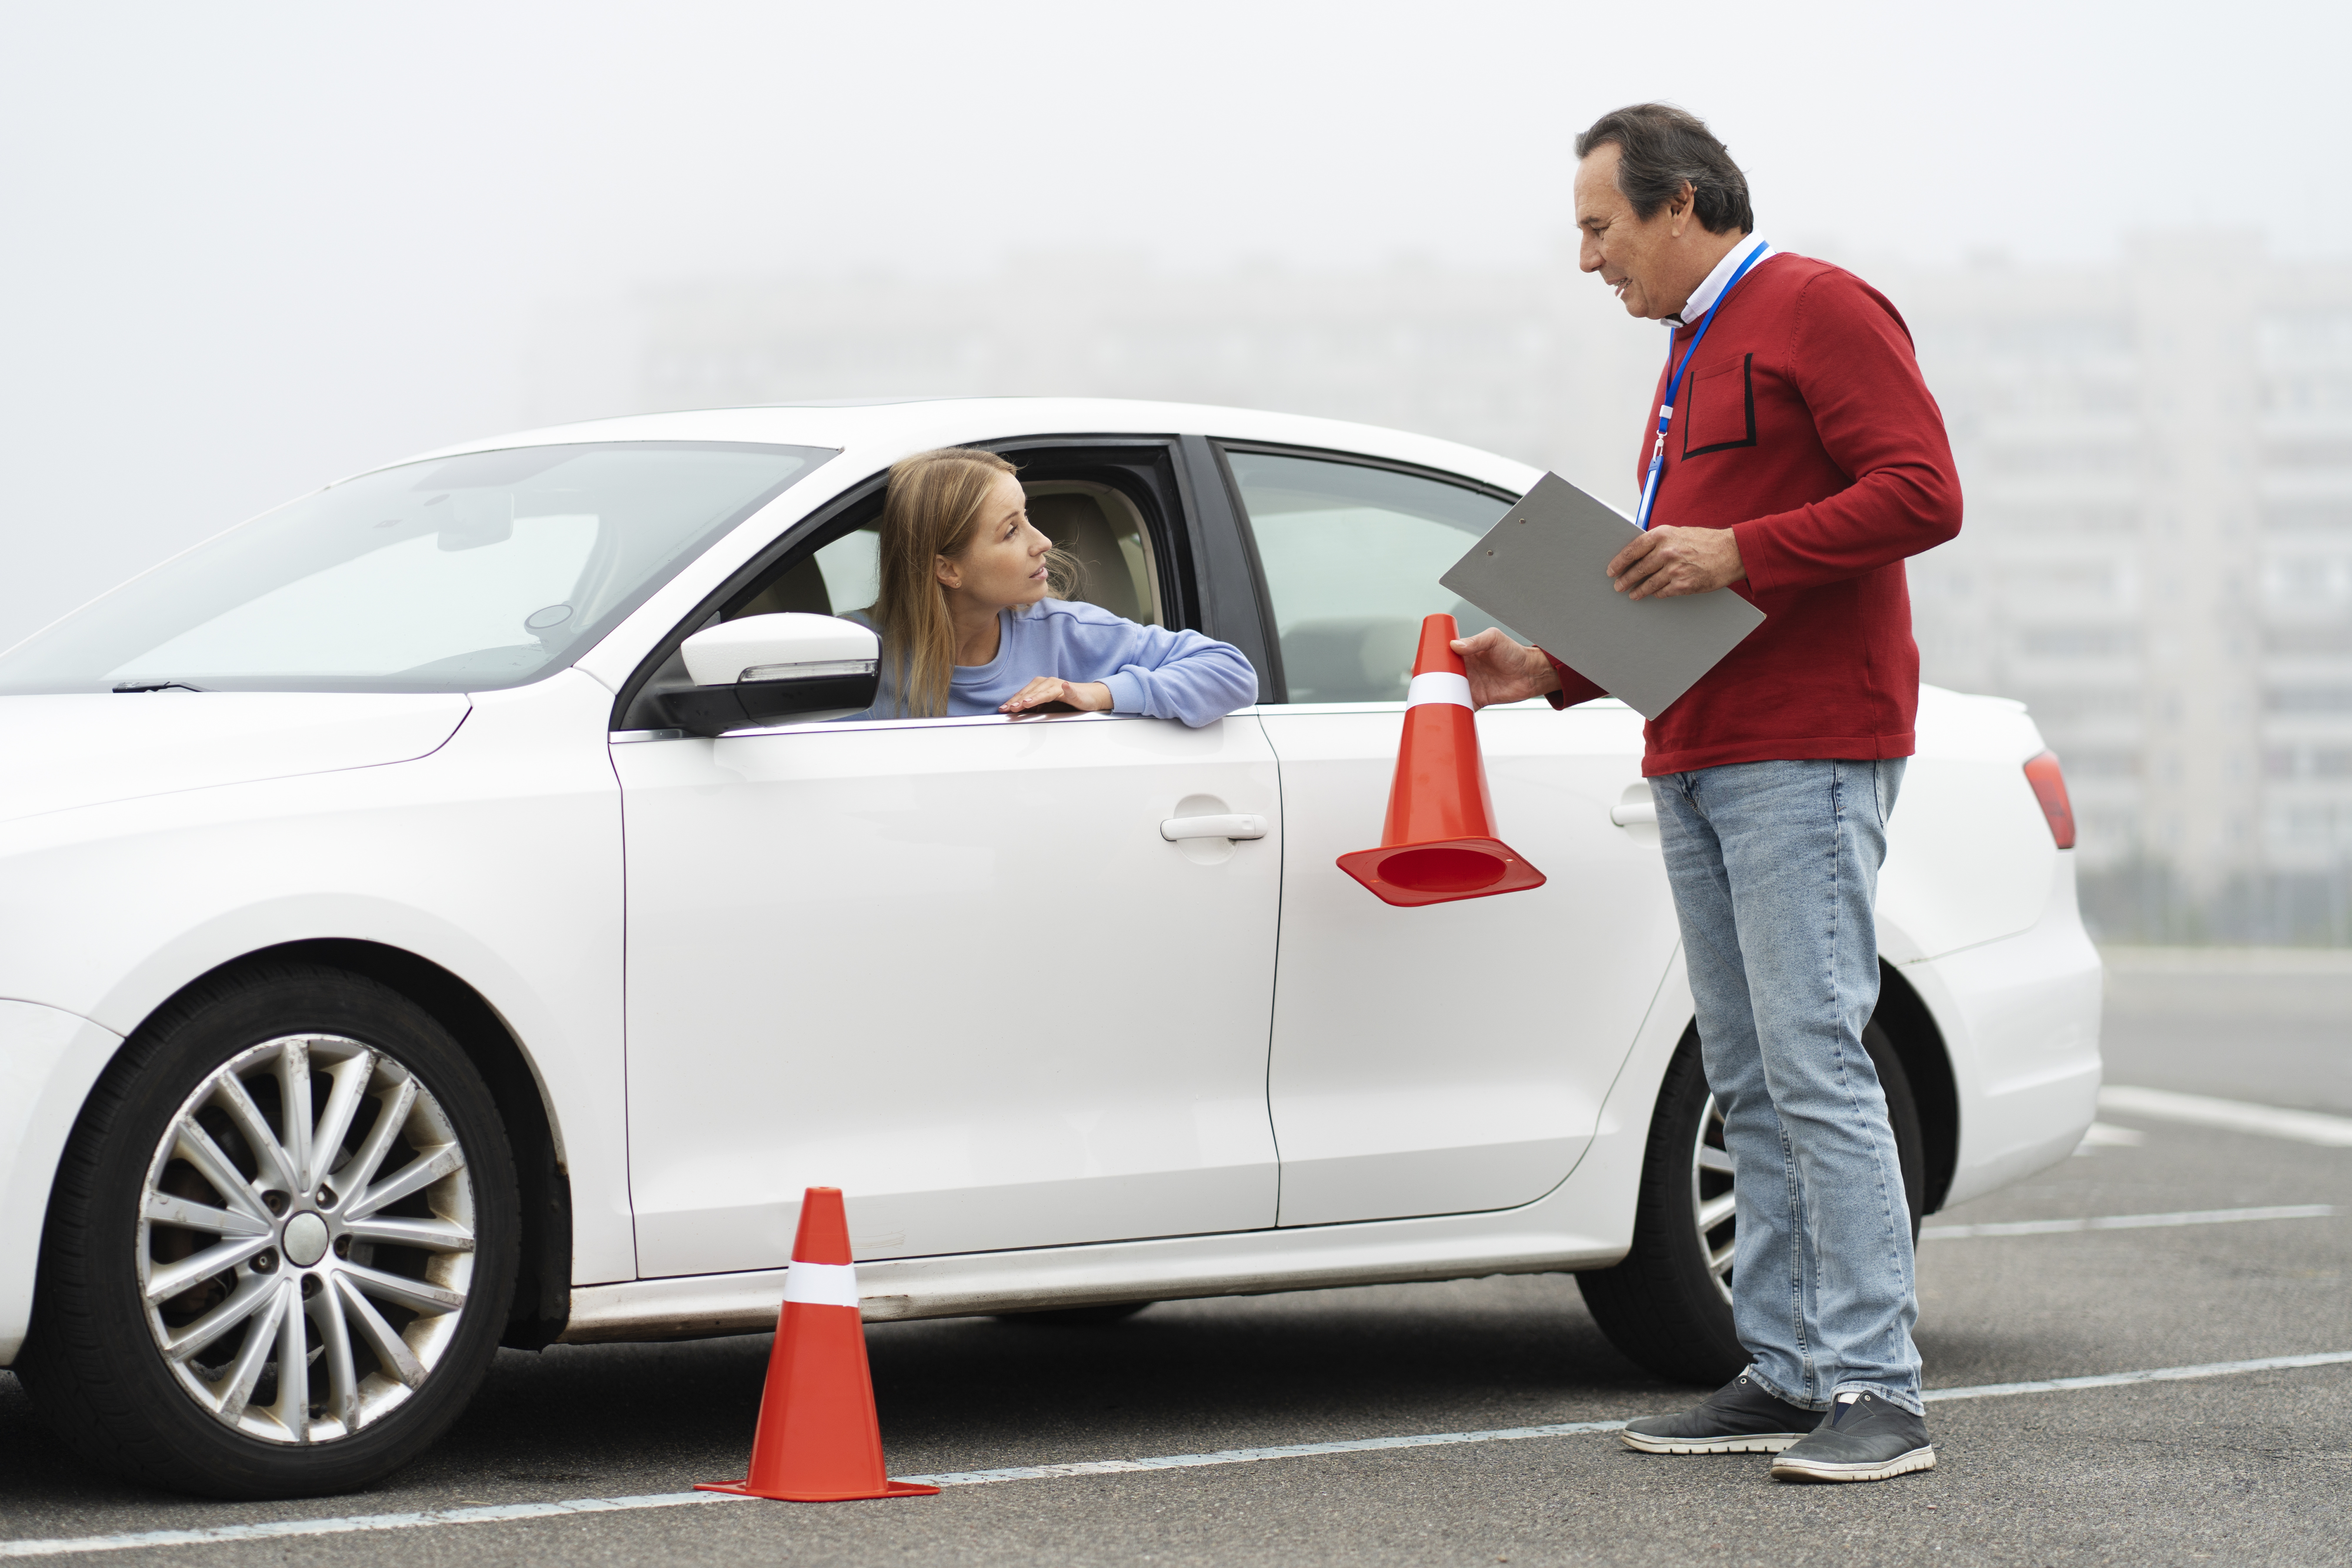 Which Time of the Day is Best to Book a Practical Driving Test?